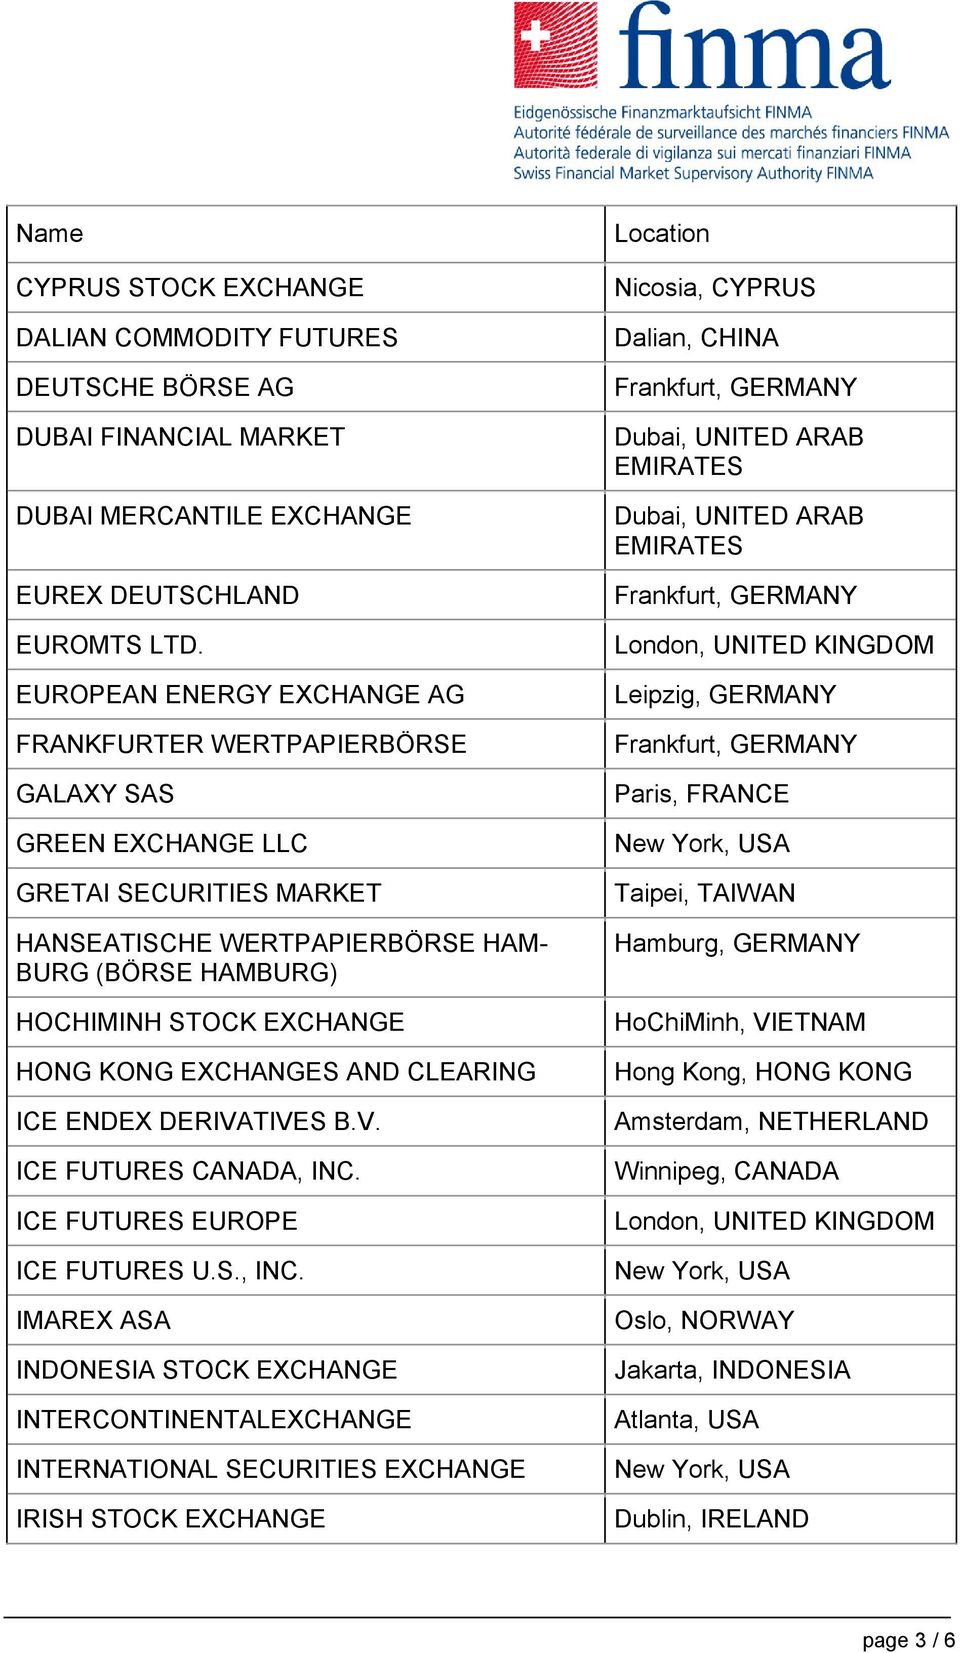 KONG EXCHANGES AND CLEARING ICE ENDEX DERIVATIVES B.V. ICE FUTURES CANADA, INC.